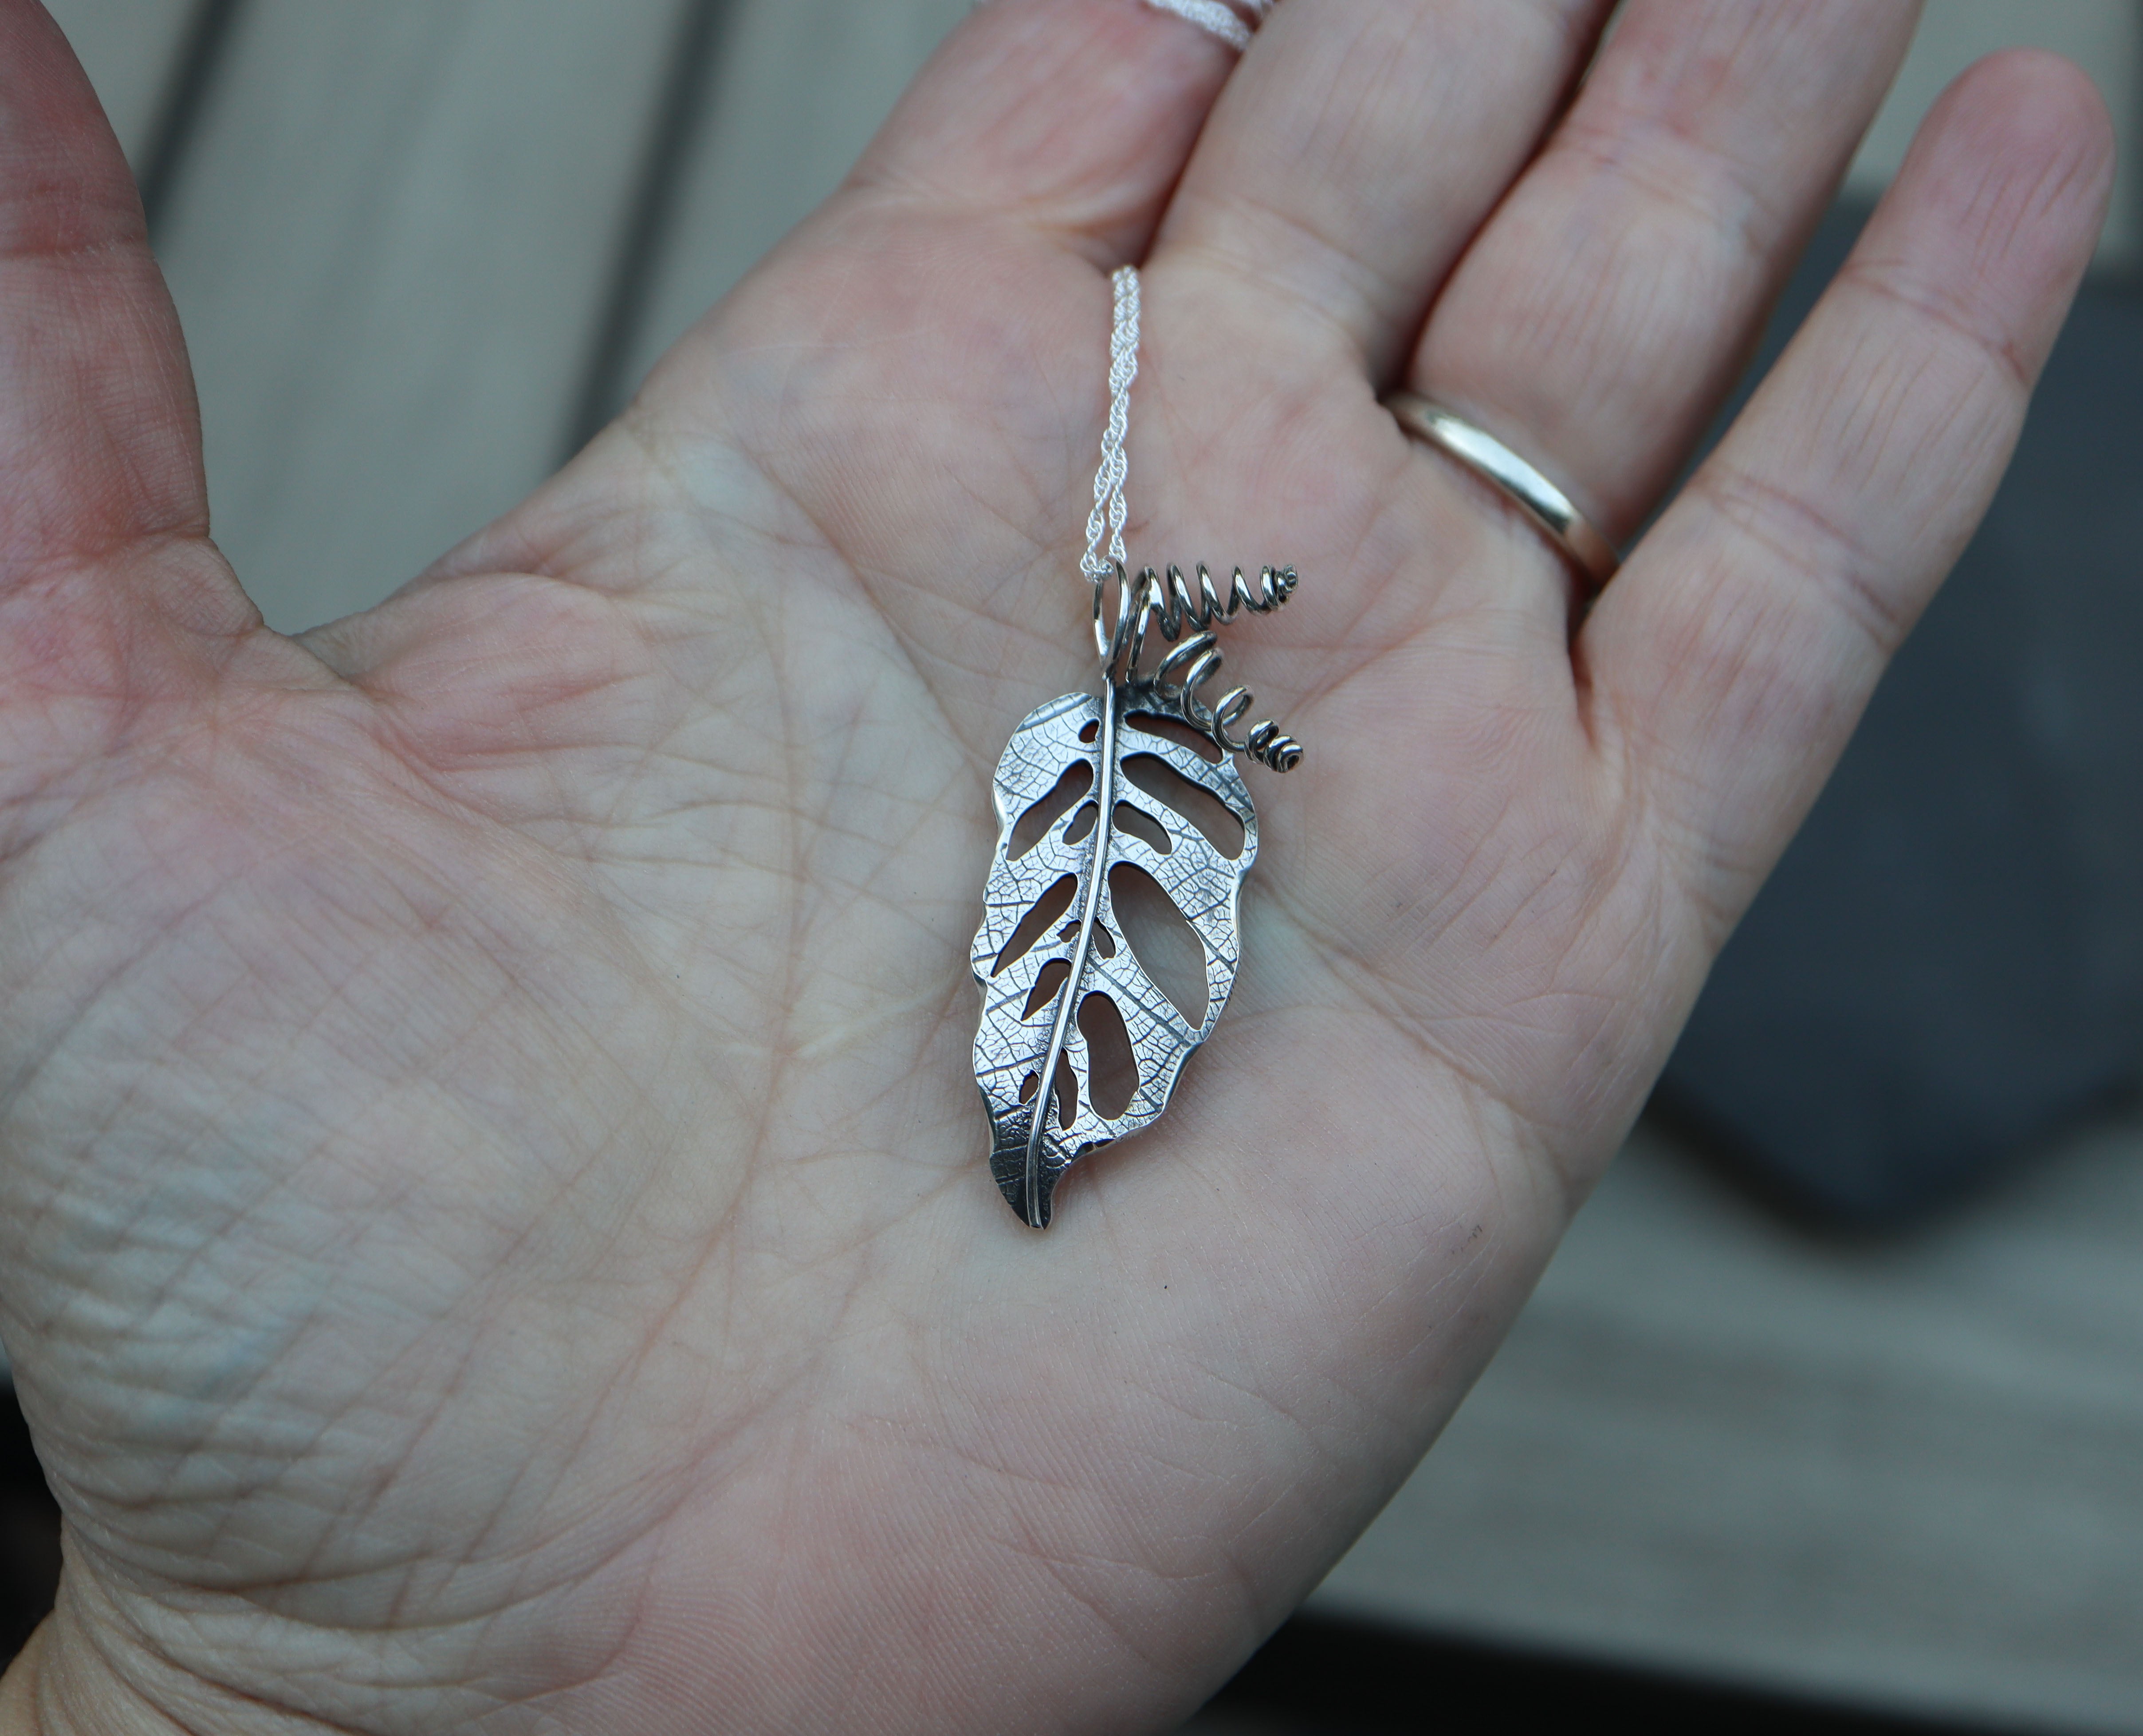 a handmade sterling silver monstera adansonii leaf pendant shown in someone's hand for size scale